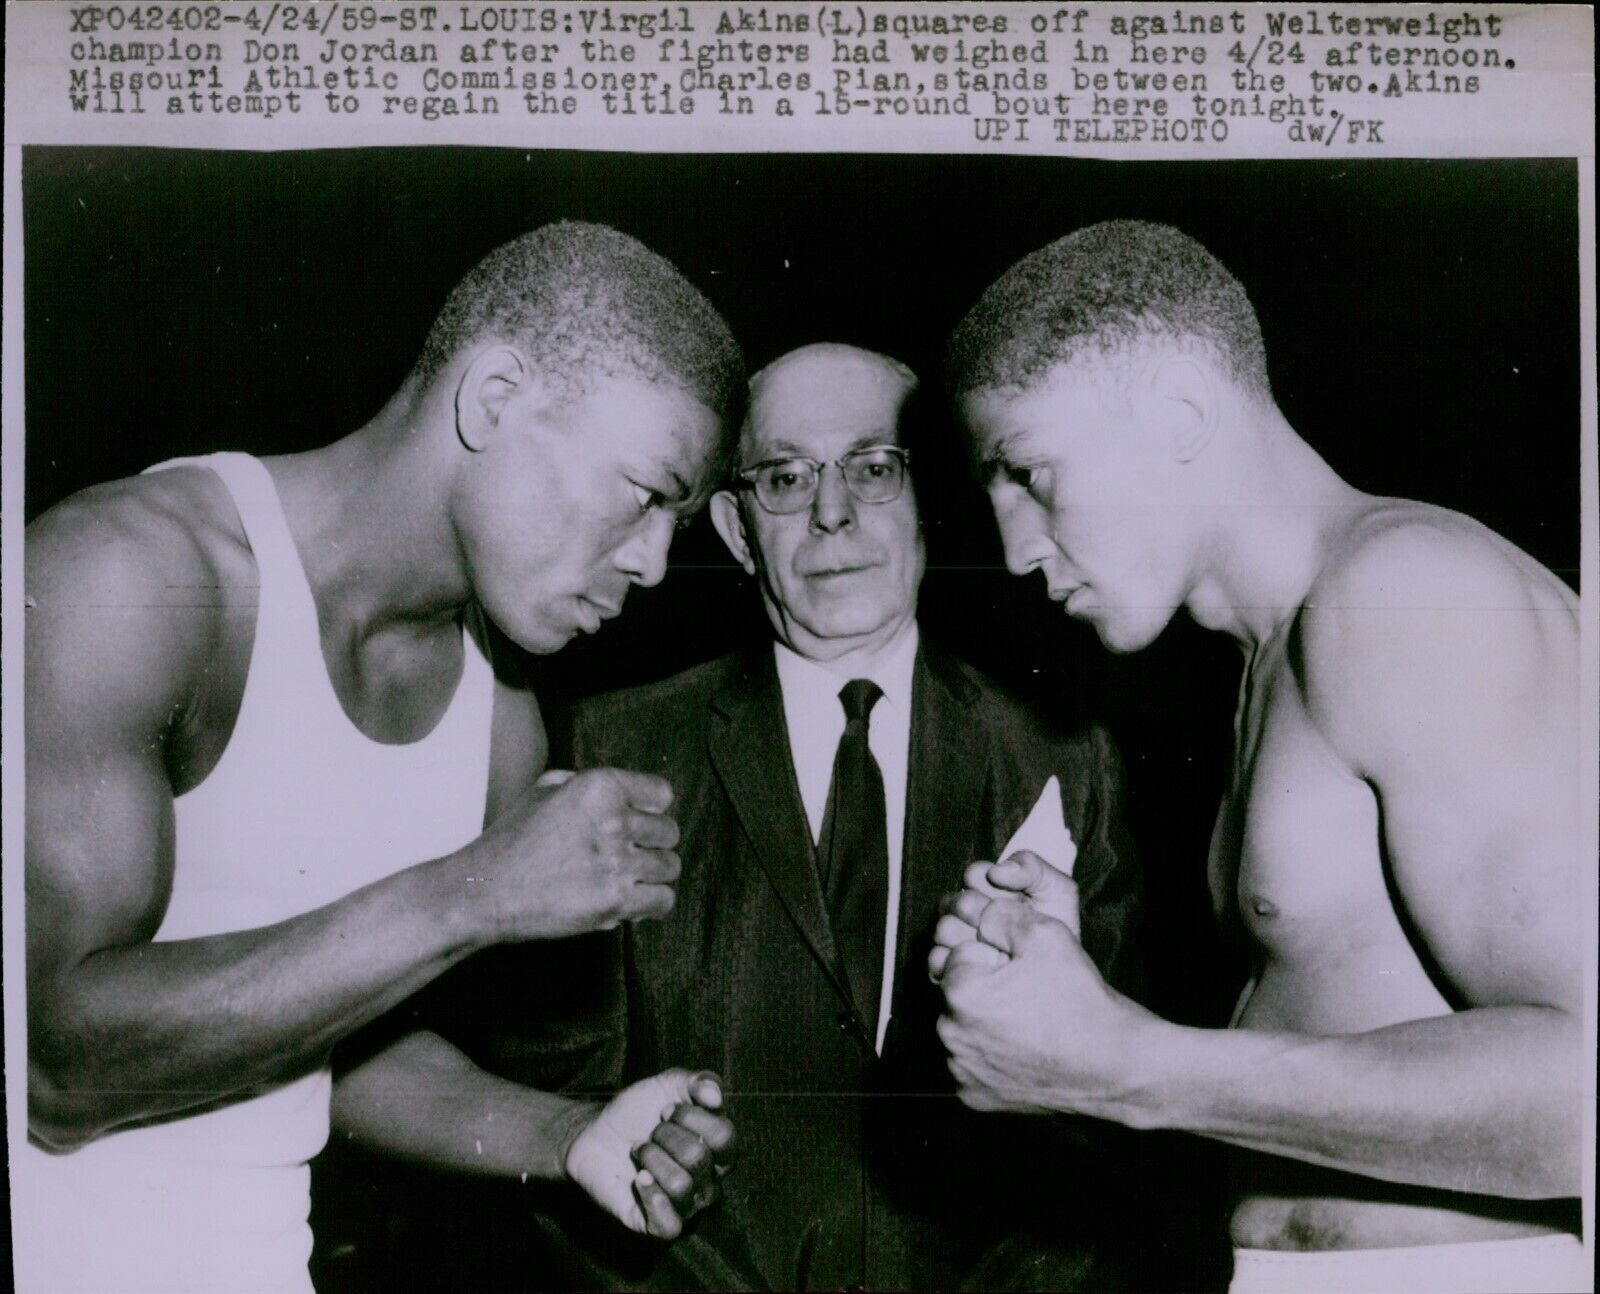 LG867 1959 Wire Photo VIRGIL AKINS DON JORDAN Welterweight Boxing Fighters STL